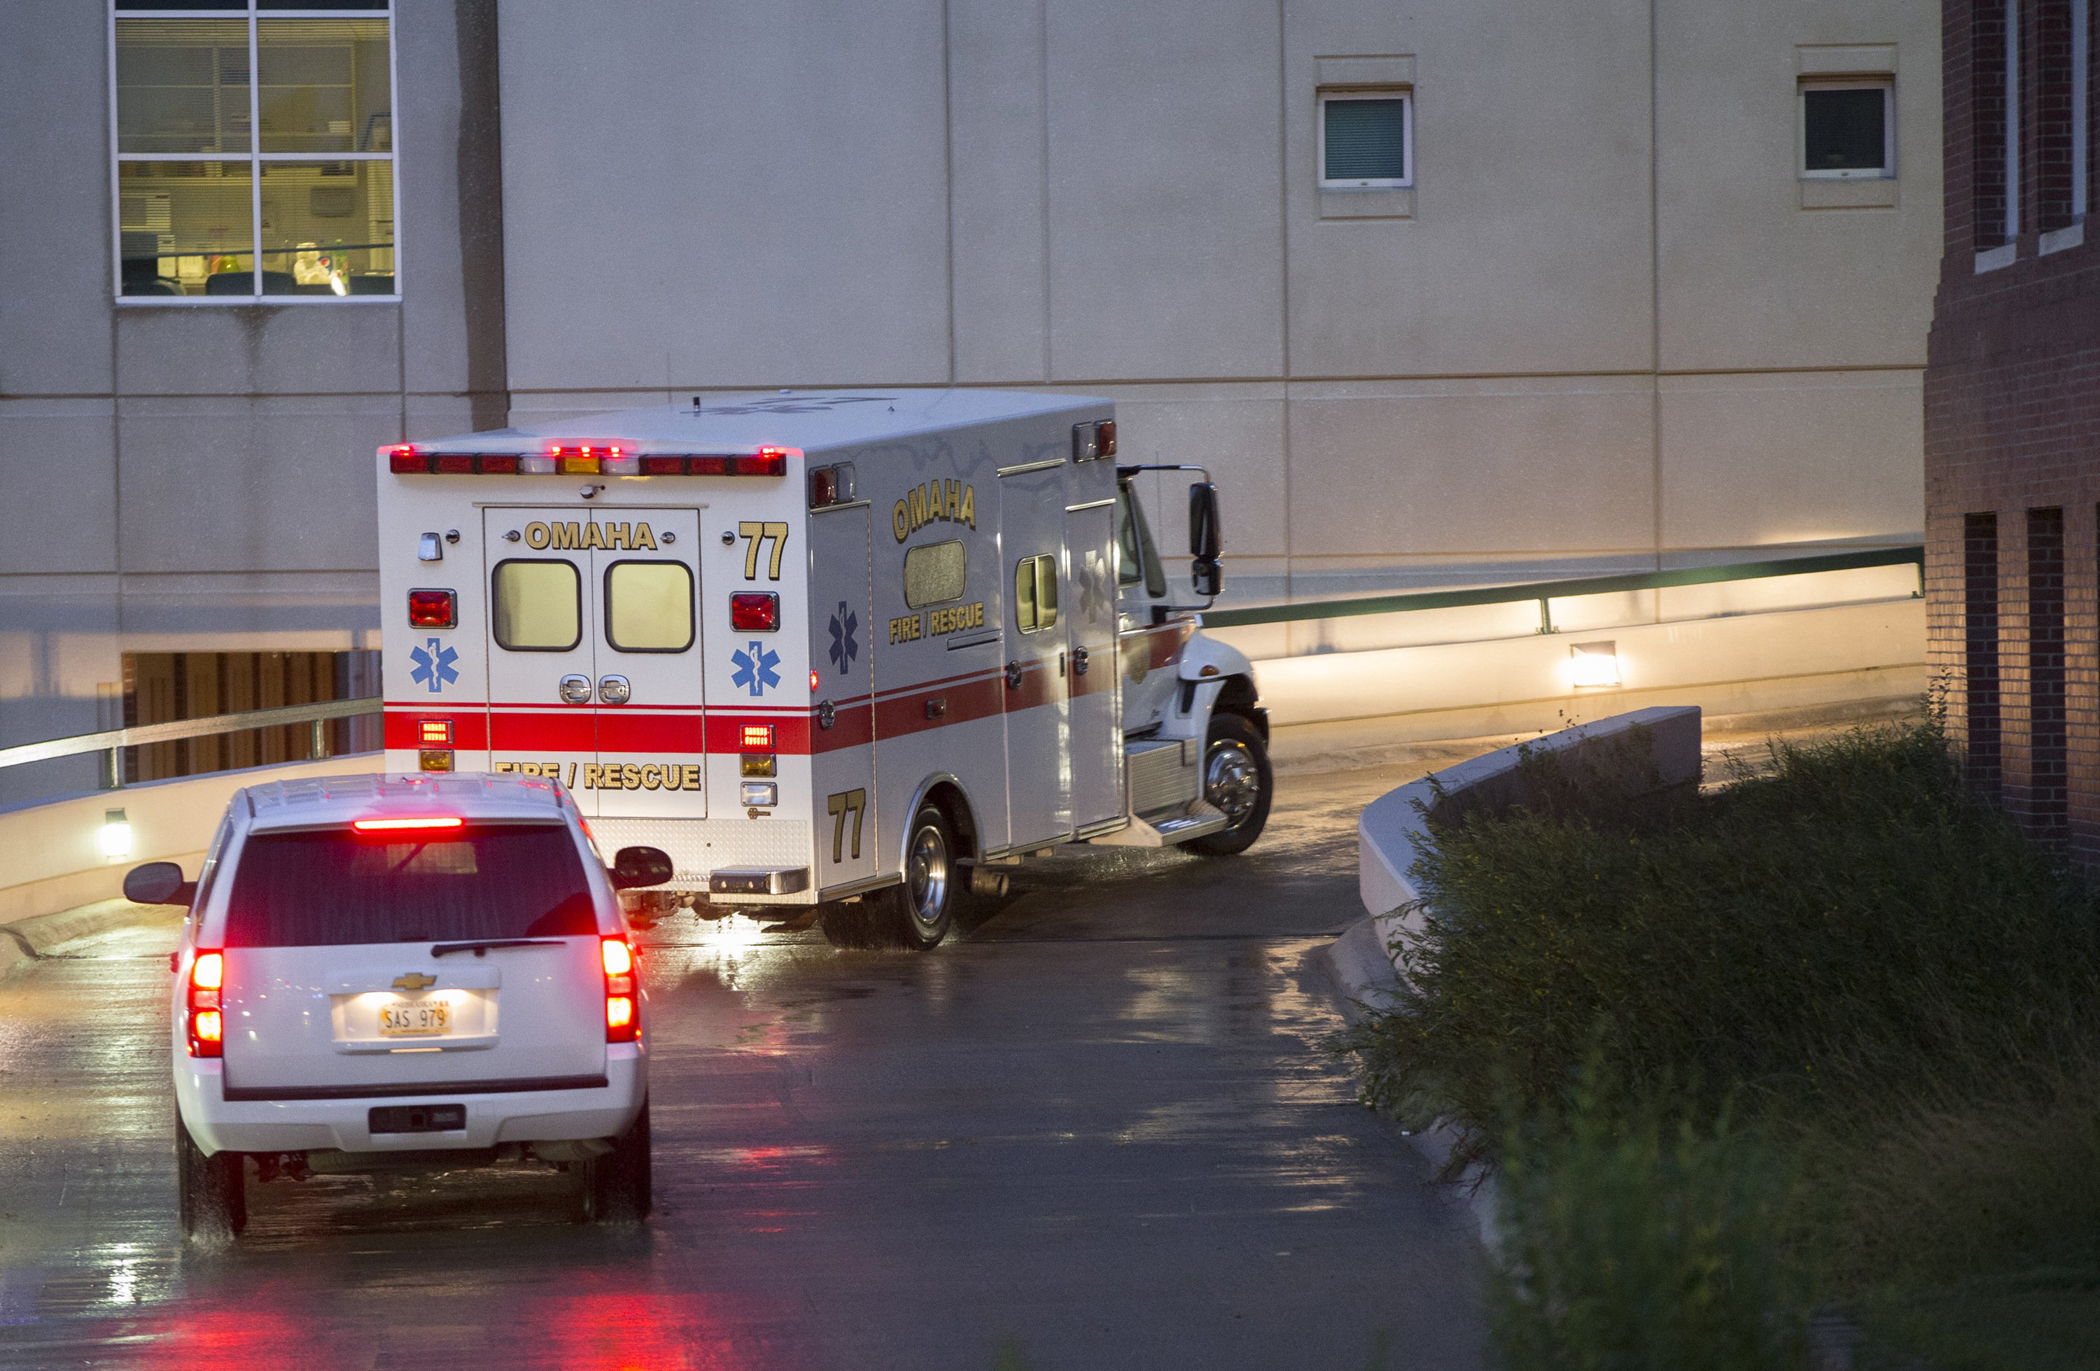 The ambulance transporting Dr. Rick Sacra, 51, who was infected with Ebola while serving as an obstetrician in Liberia, arrives to the Nebraska Medical Center in Omaha, Neb., Sept. 5, 2014.